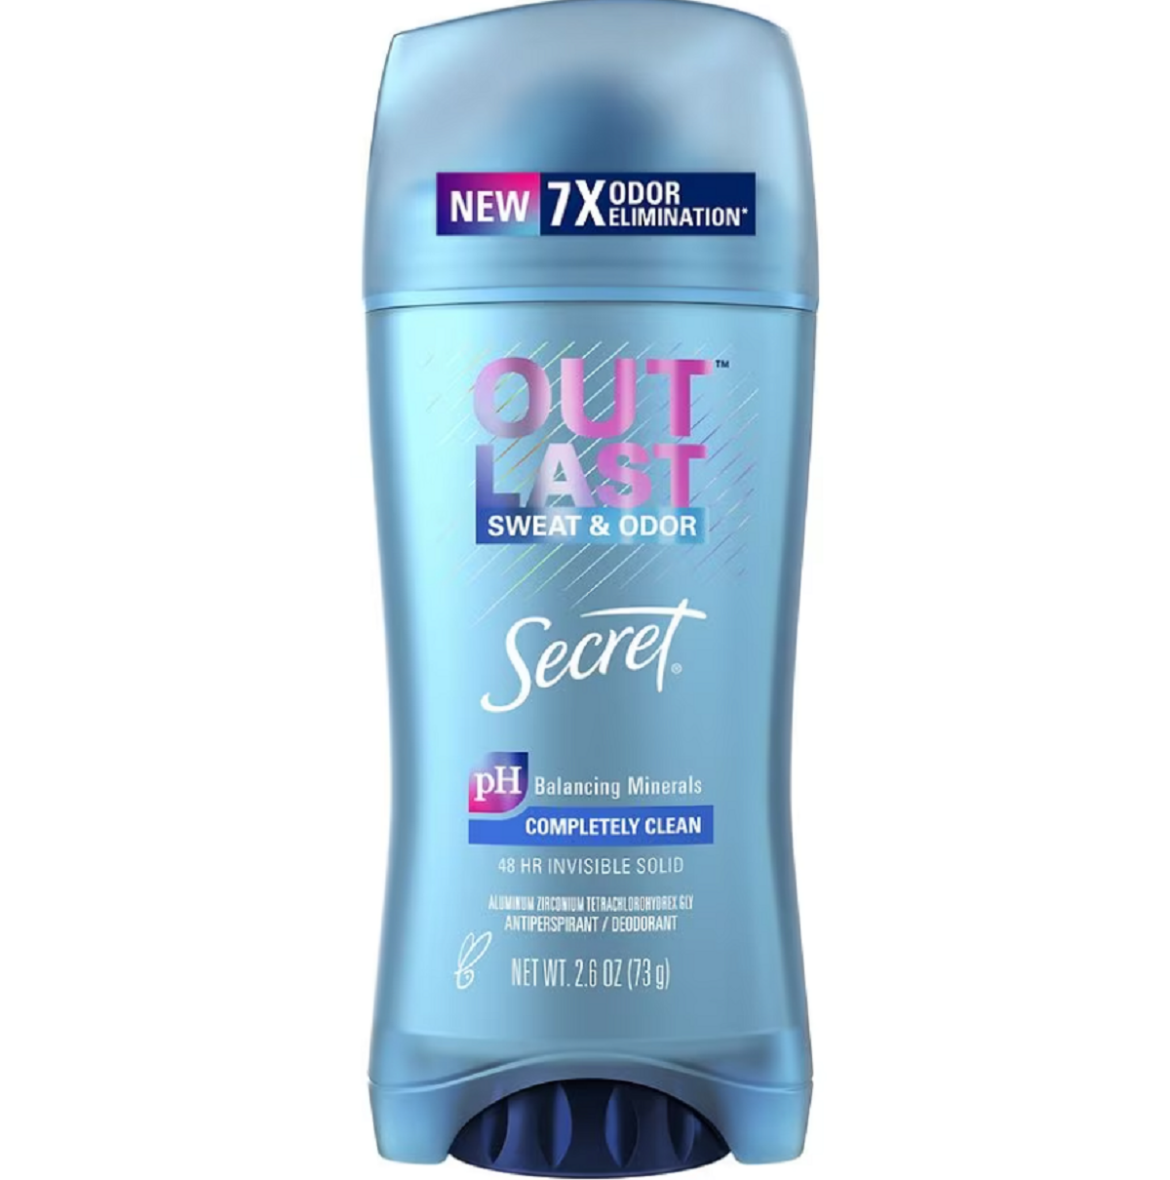 Outlast-Invisible-Solid-Antiperspirant-Deodorant-Completely-Clean, Secret Invisible Spray Coupon